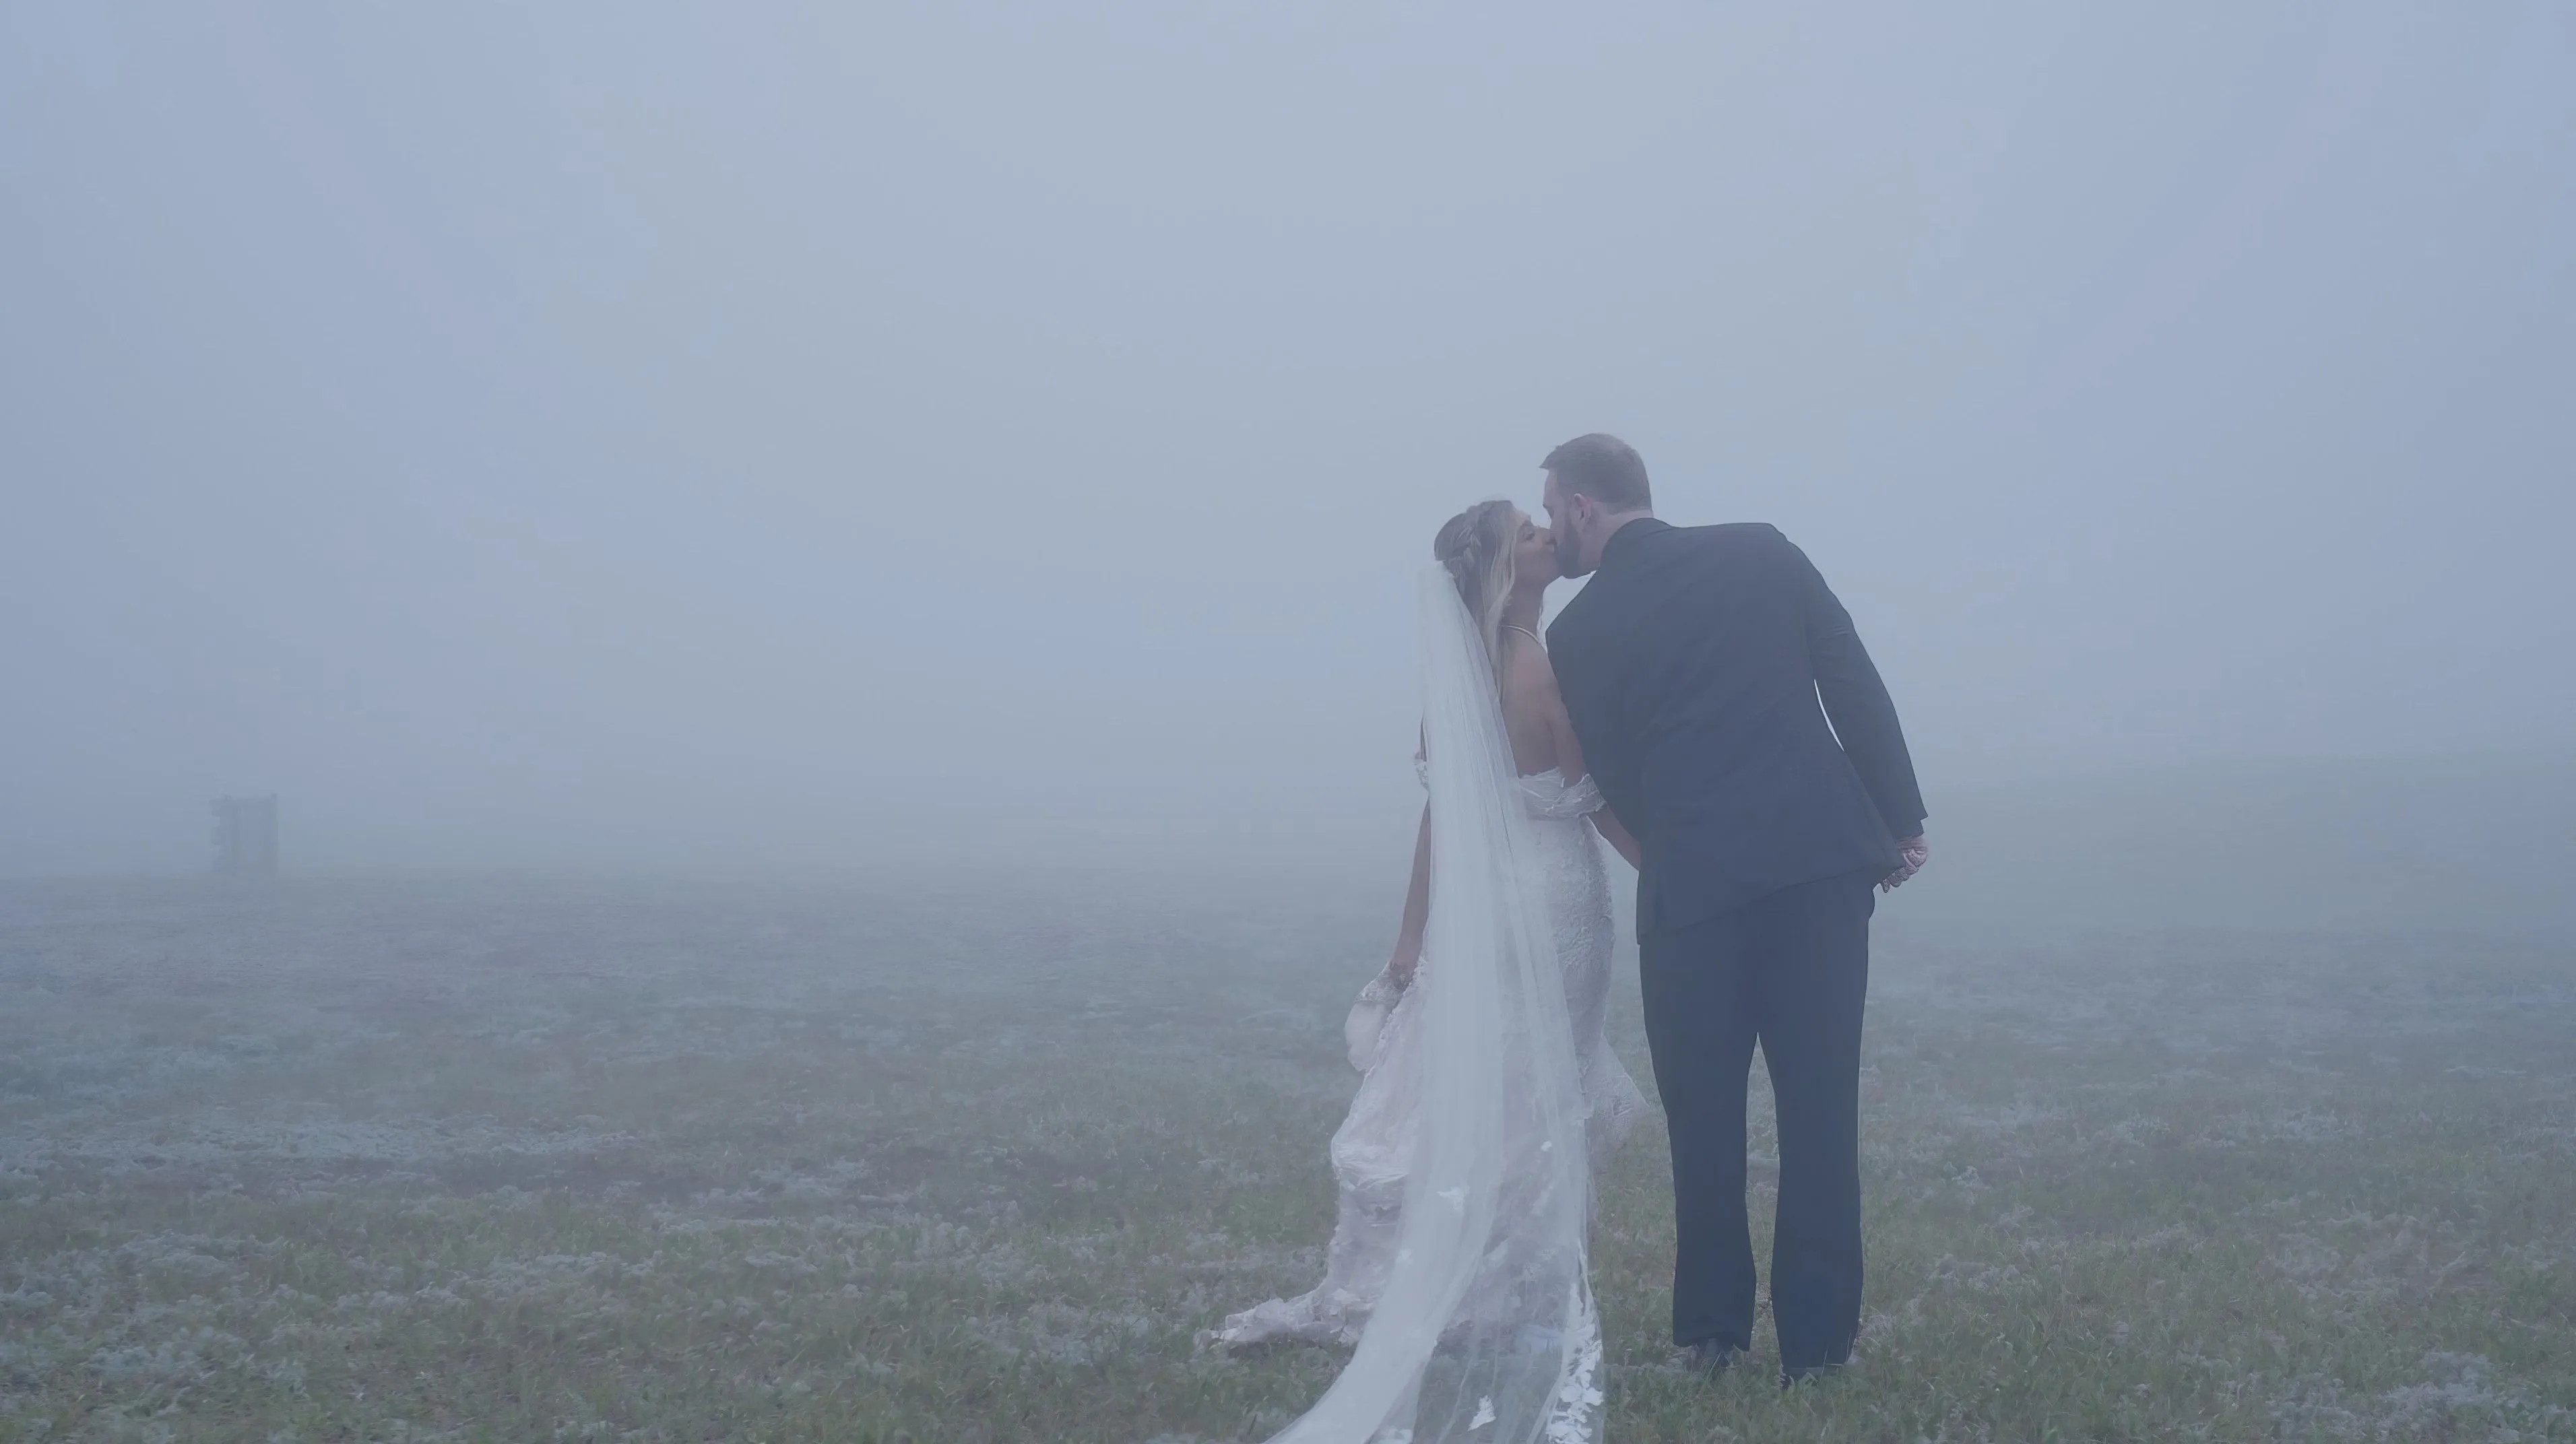 Bride and groom sharing a kiss in a foggy, misty landscape.